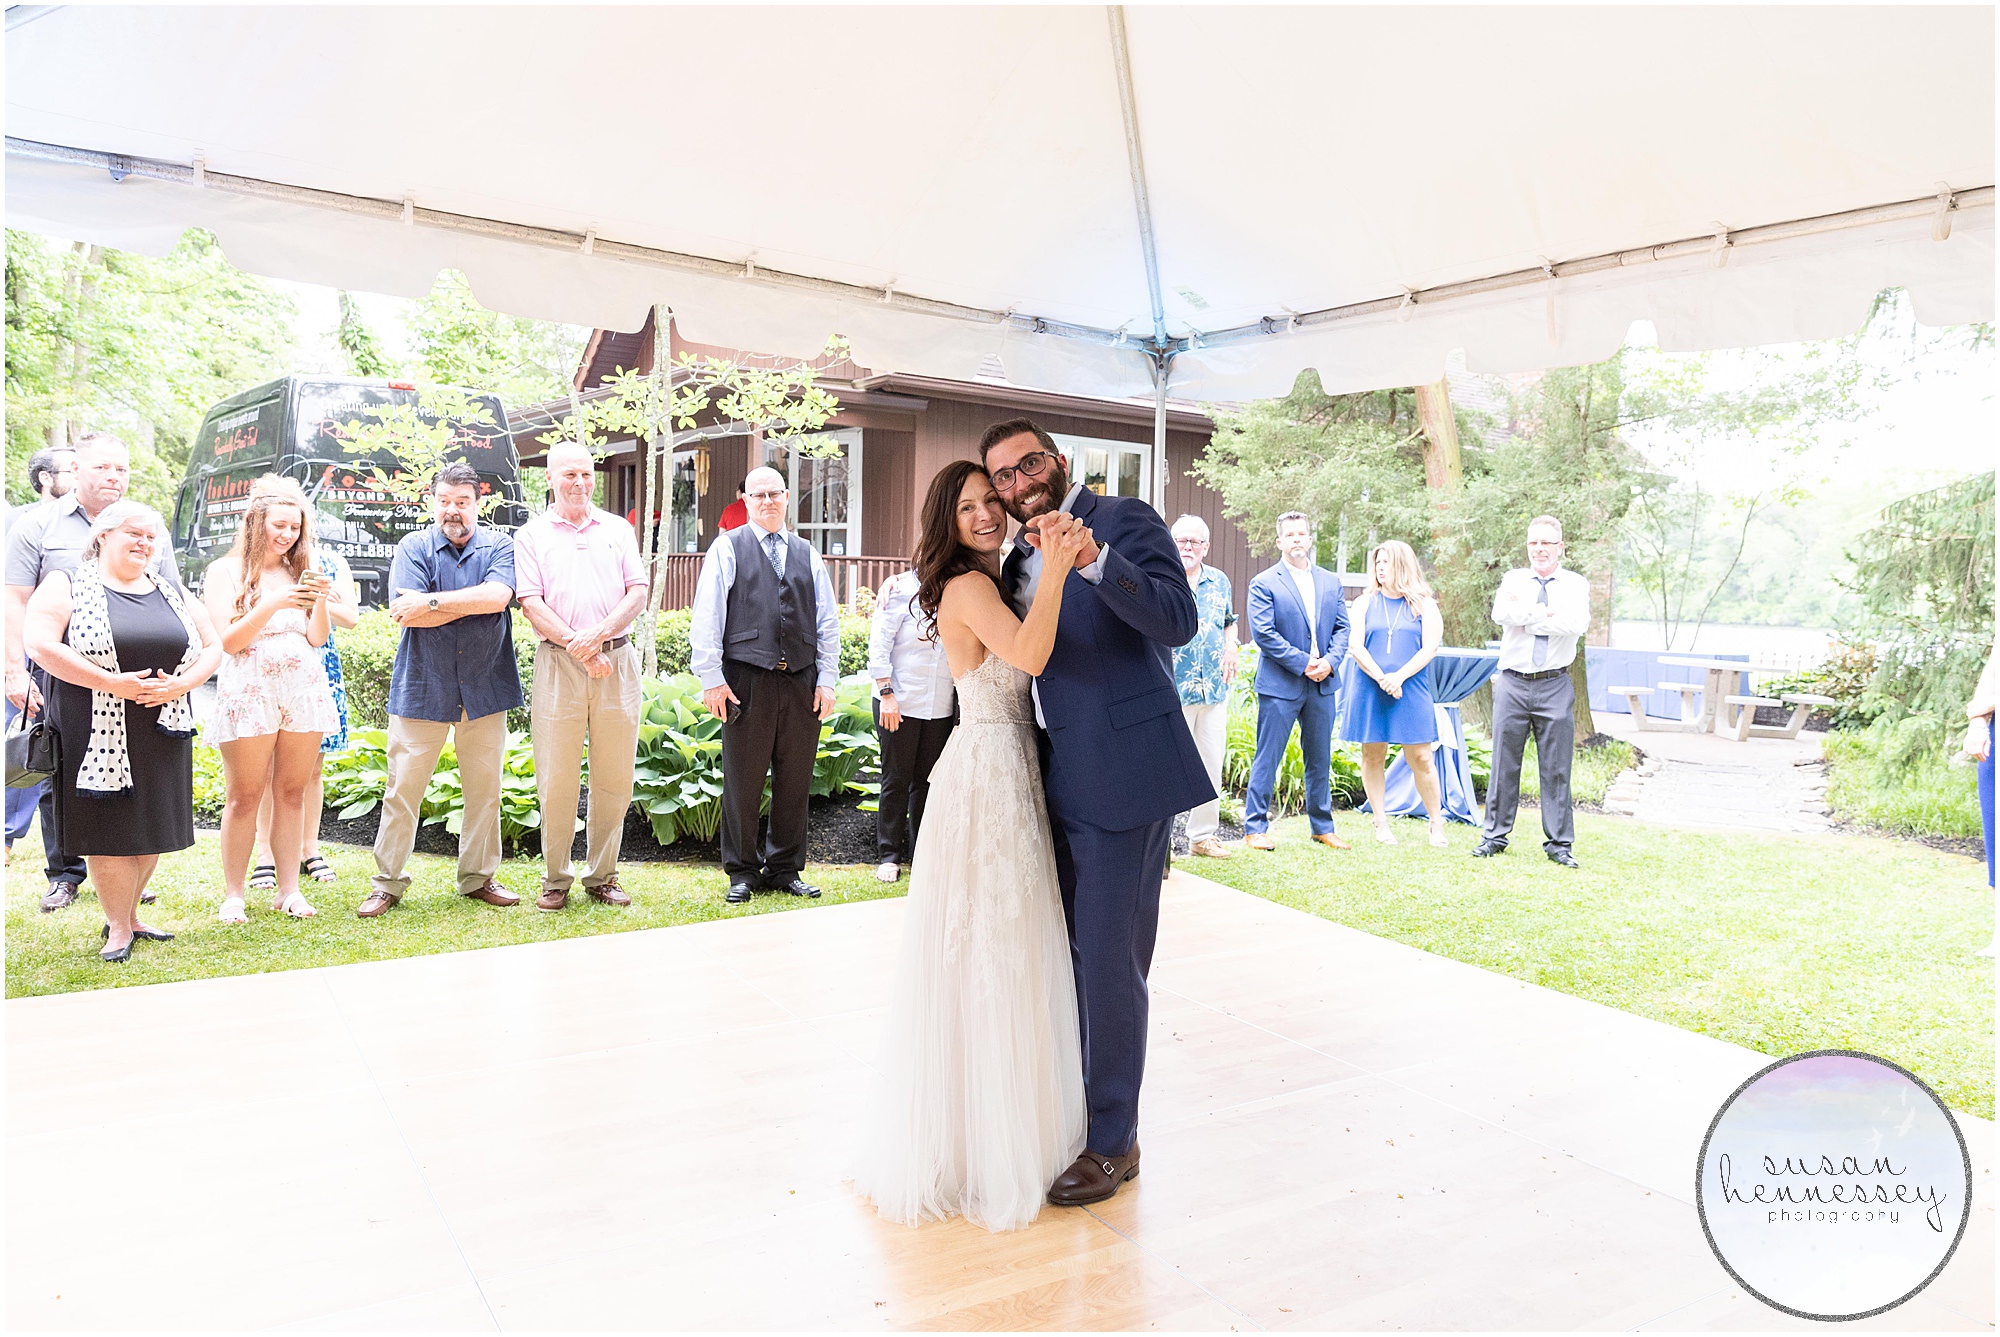 First dance for bride and groom at Tented reception at South Jersey Backyard Wedding